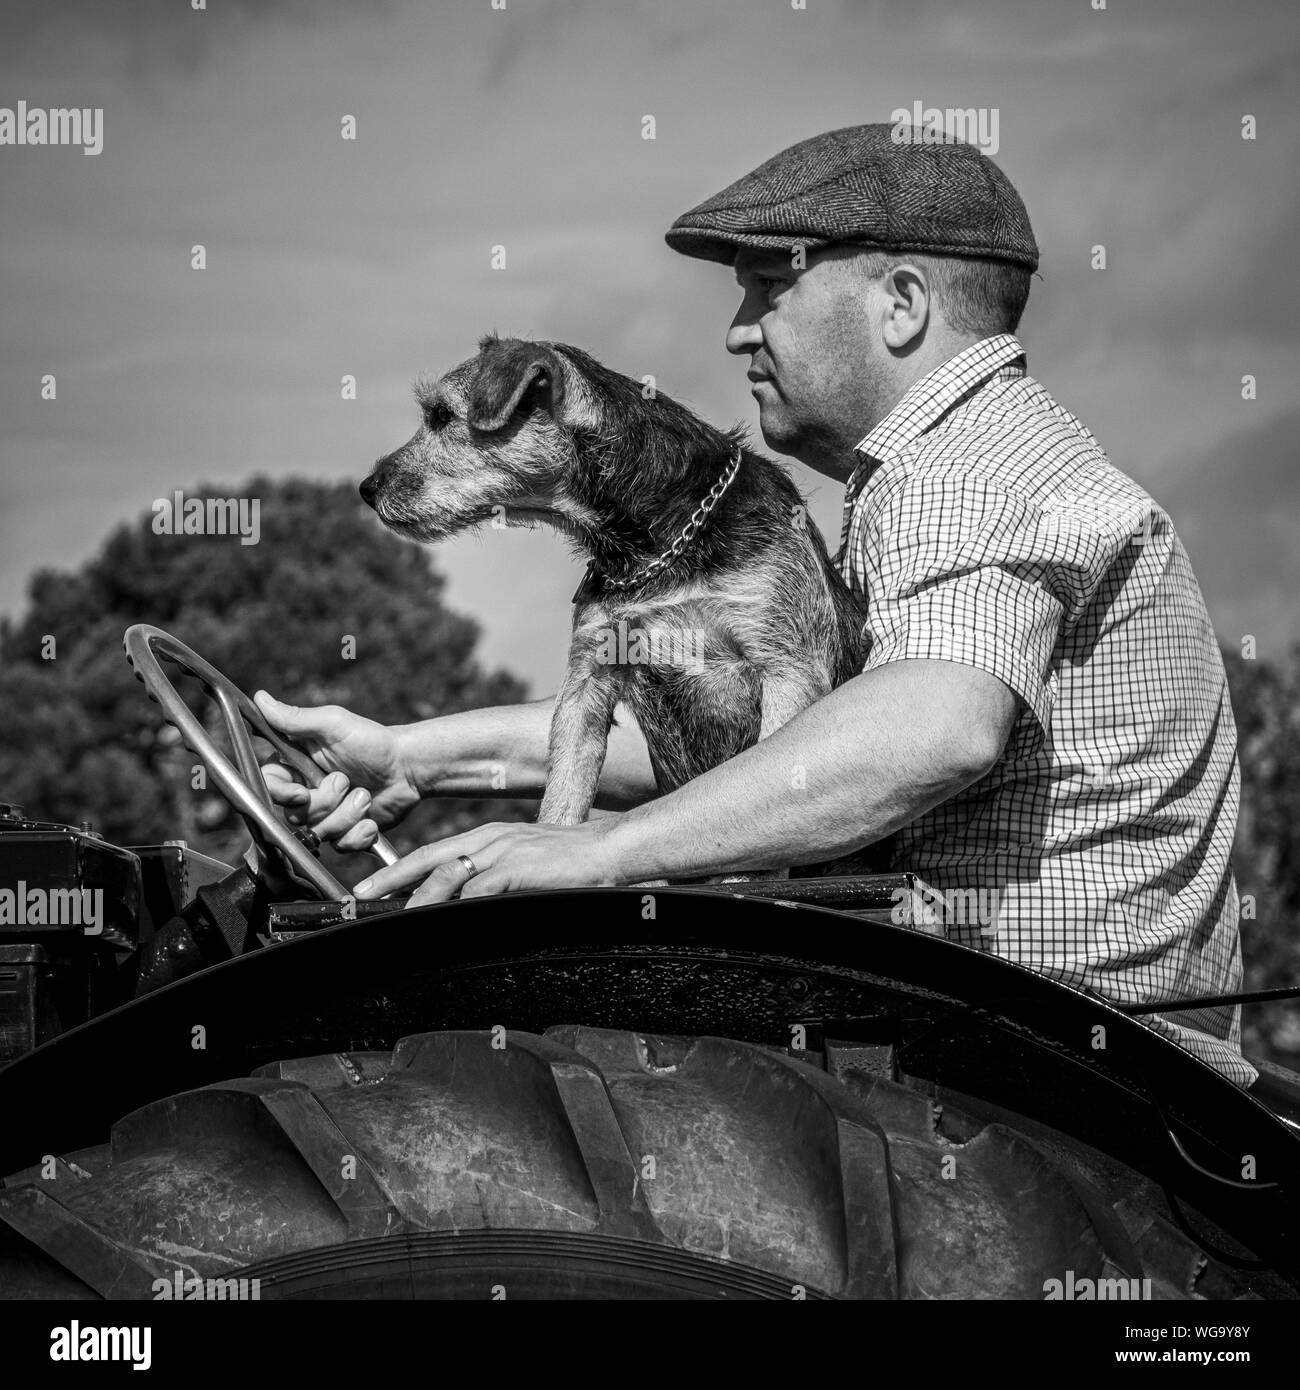 Man with dog on vintage tractor Stock Photo